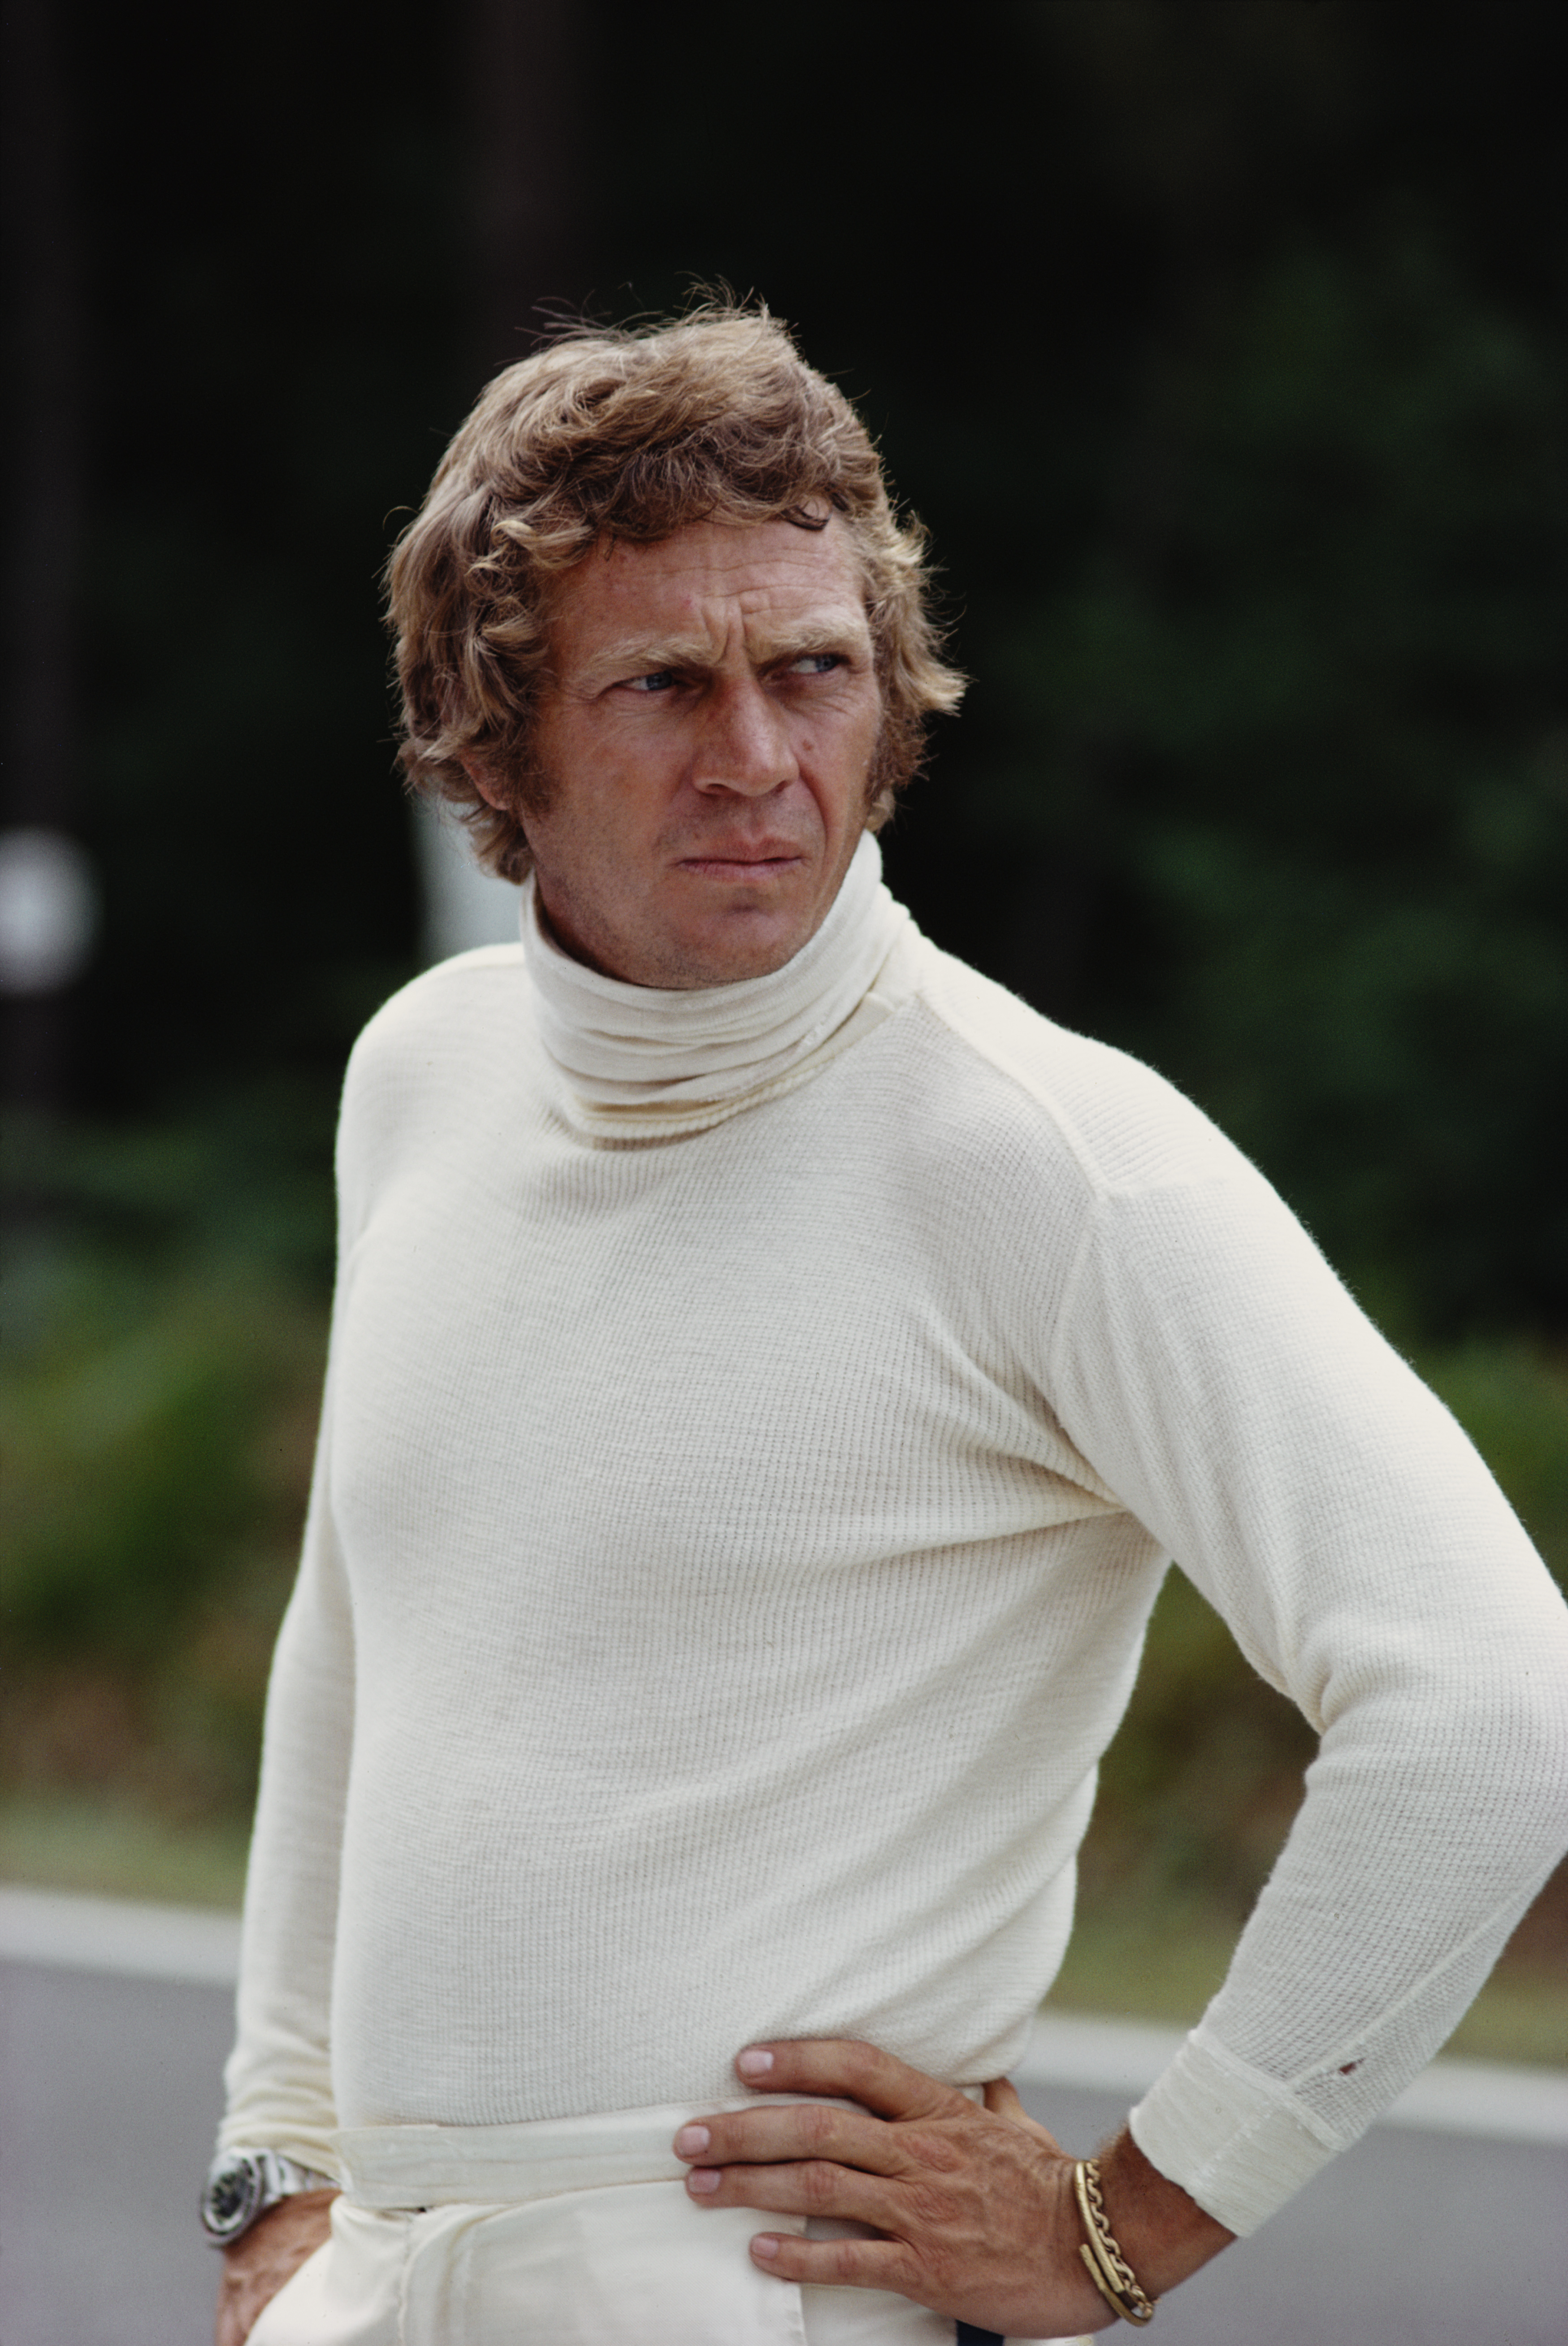 Steve McQueen during the filming of "Le Mans" in 1971 | Source: Getty Images